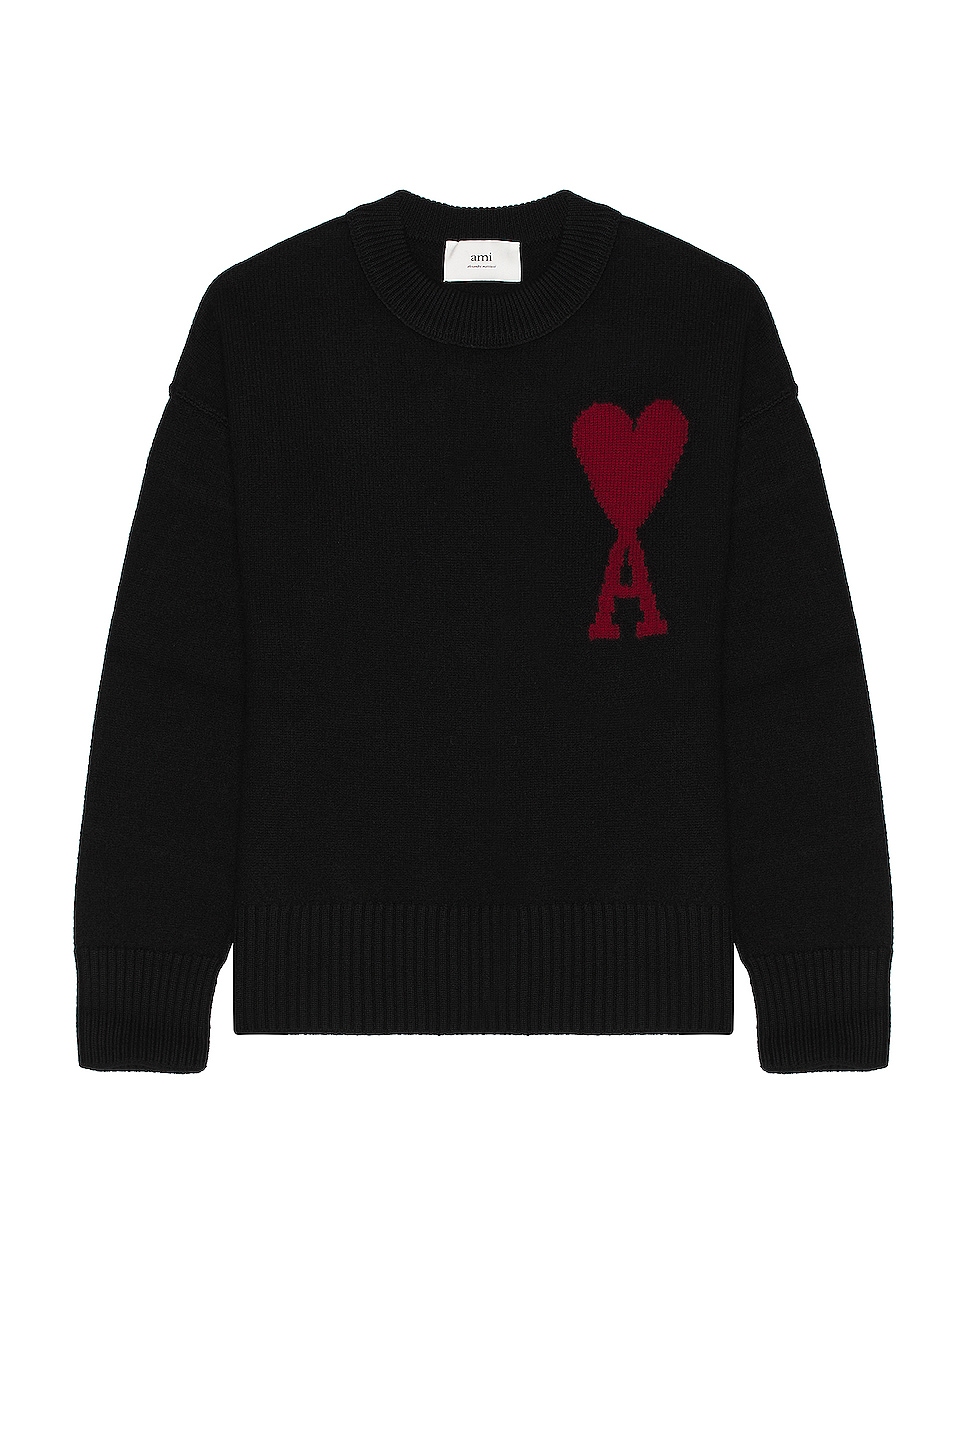 Image 1 of ami Red ADC Sweater in Black & Red